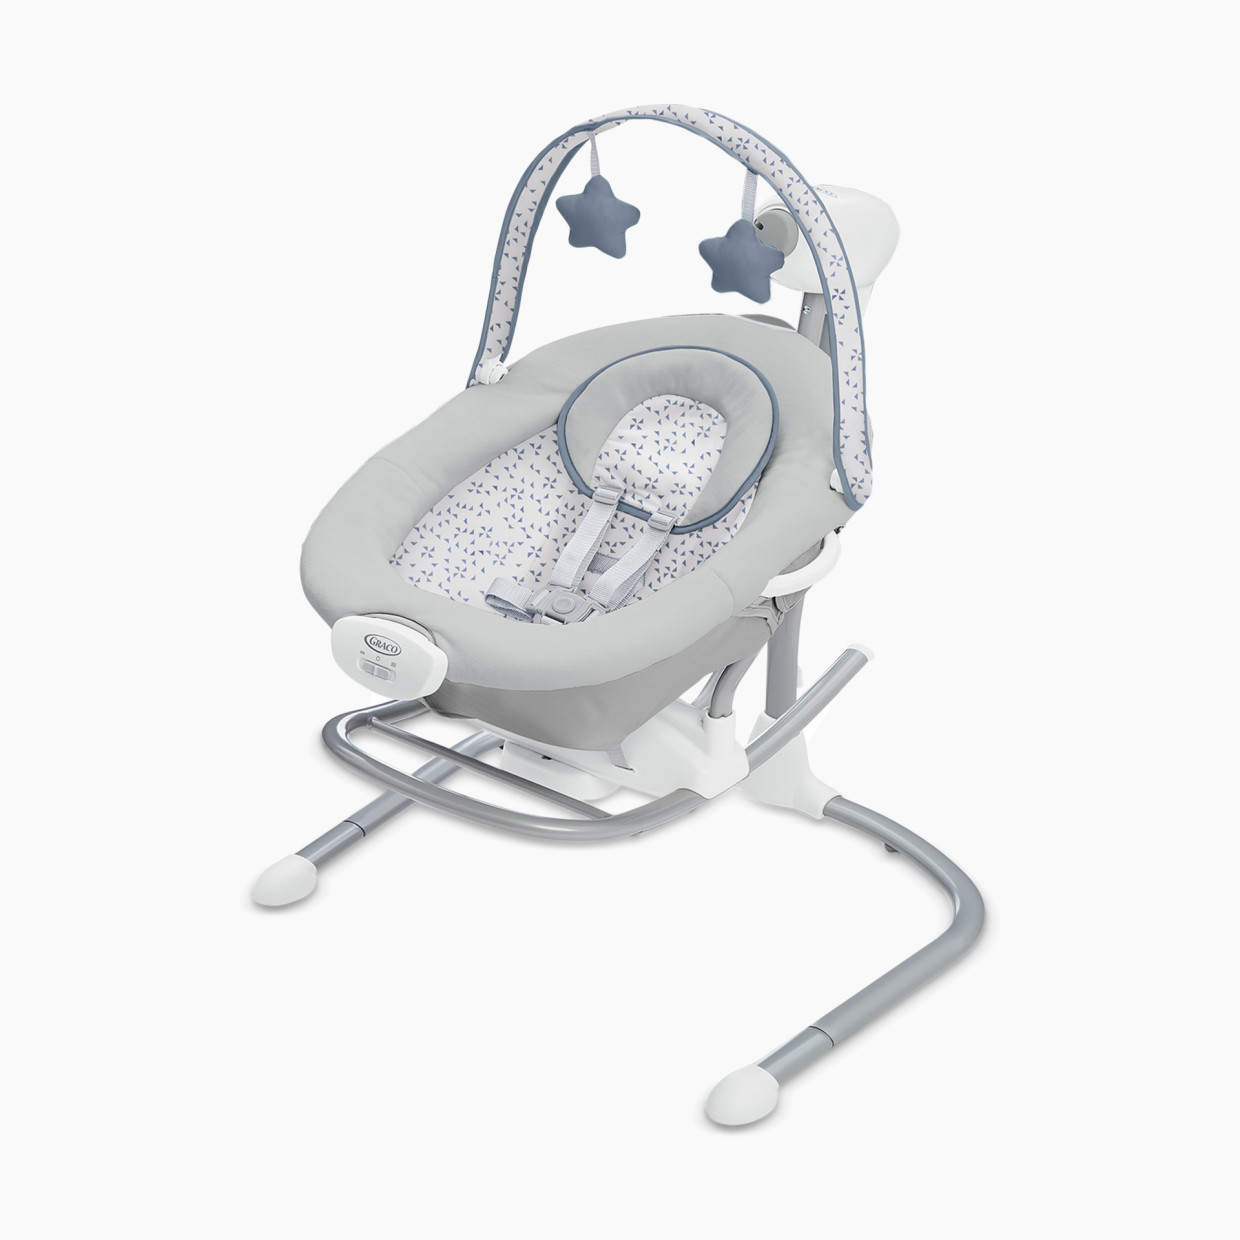 Graco Soothe 'n Sway Swing with Portable Rocker - Easton.